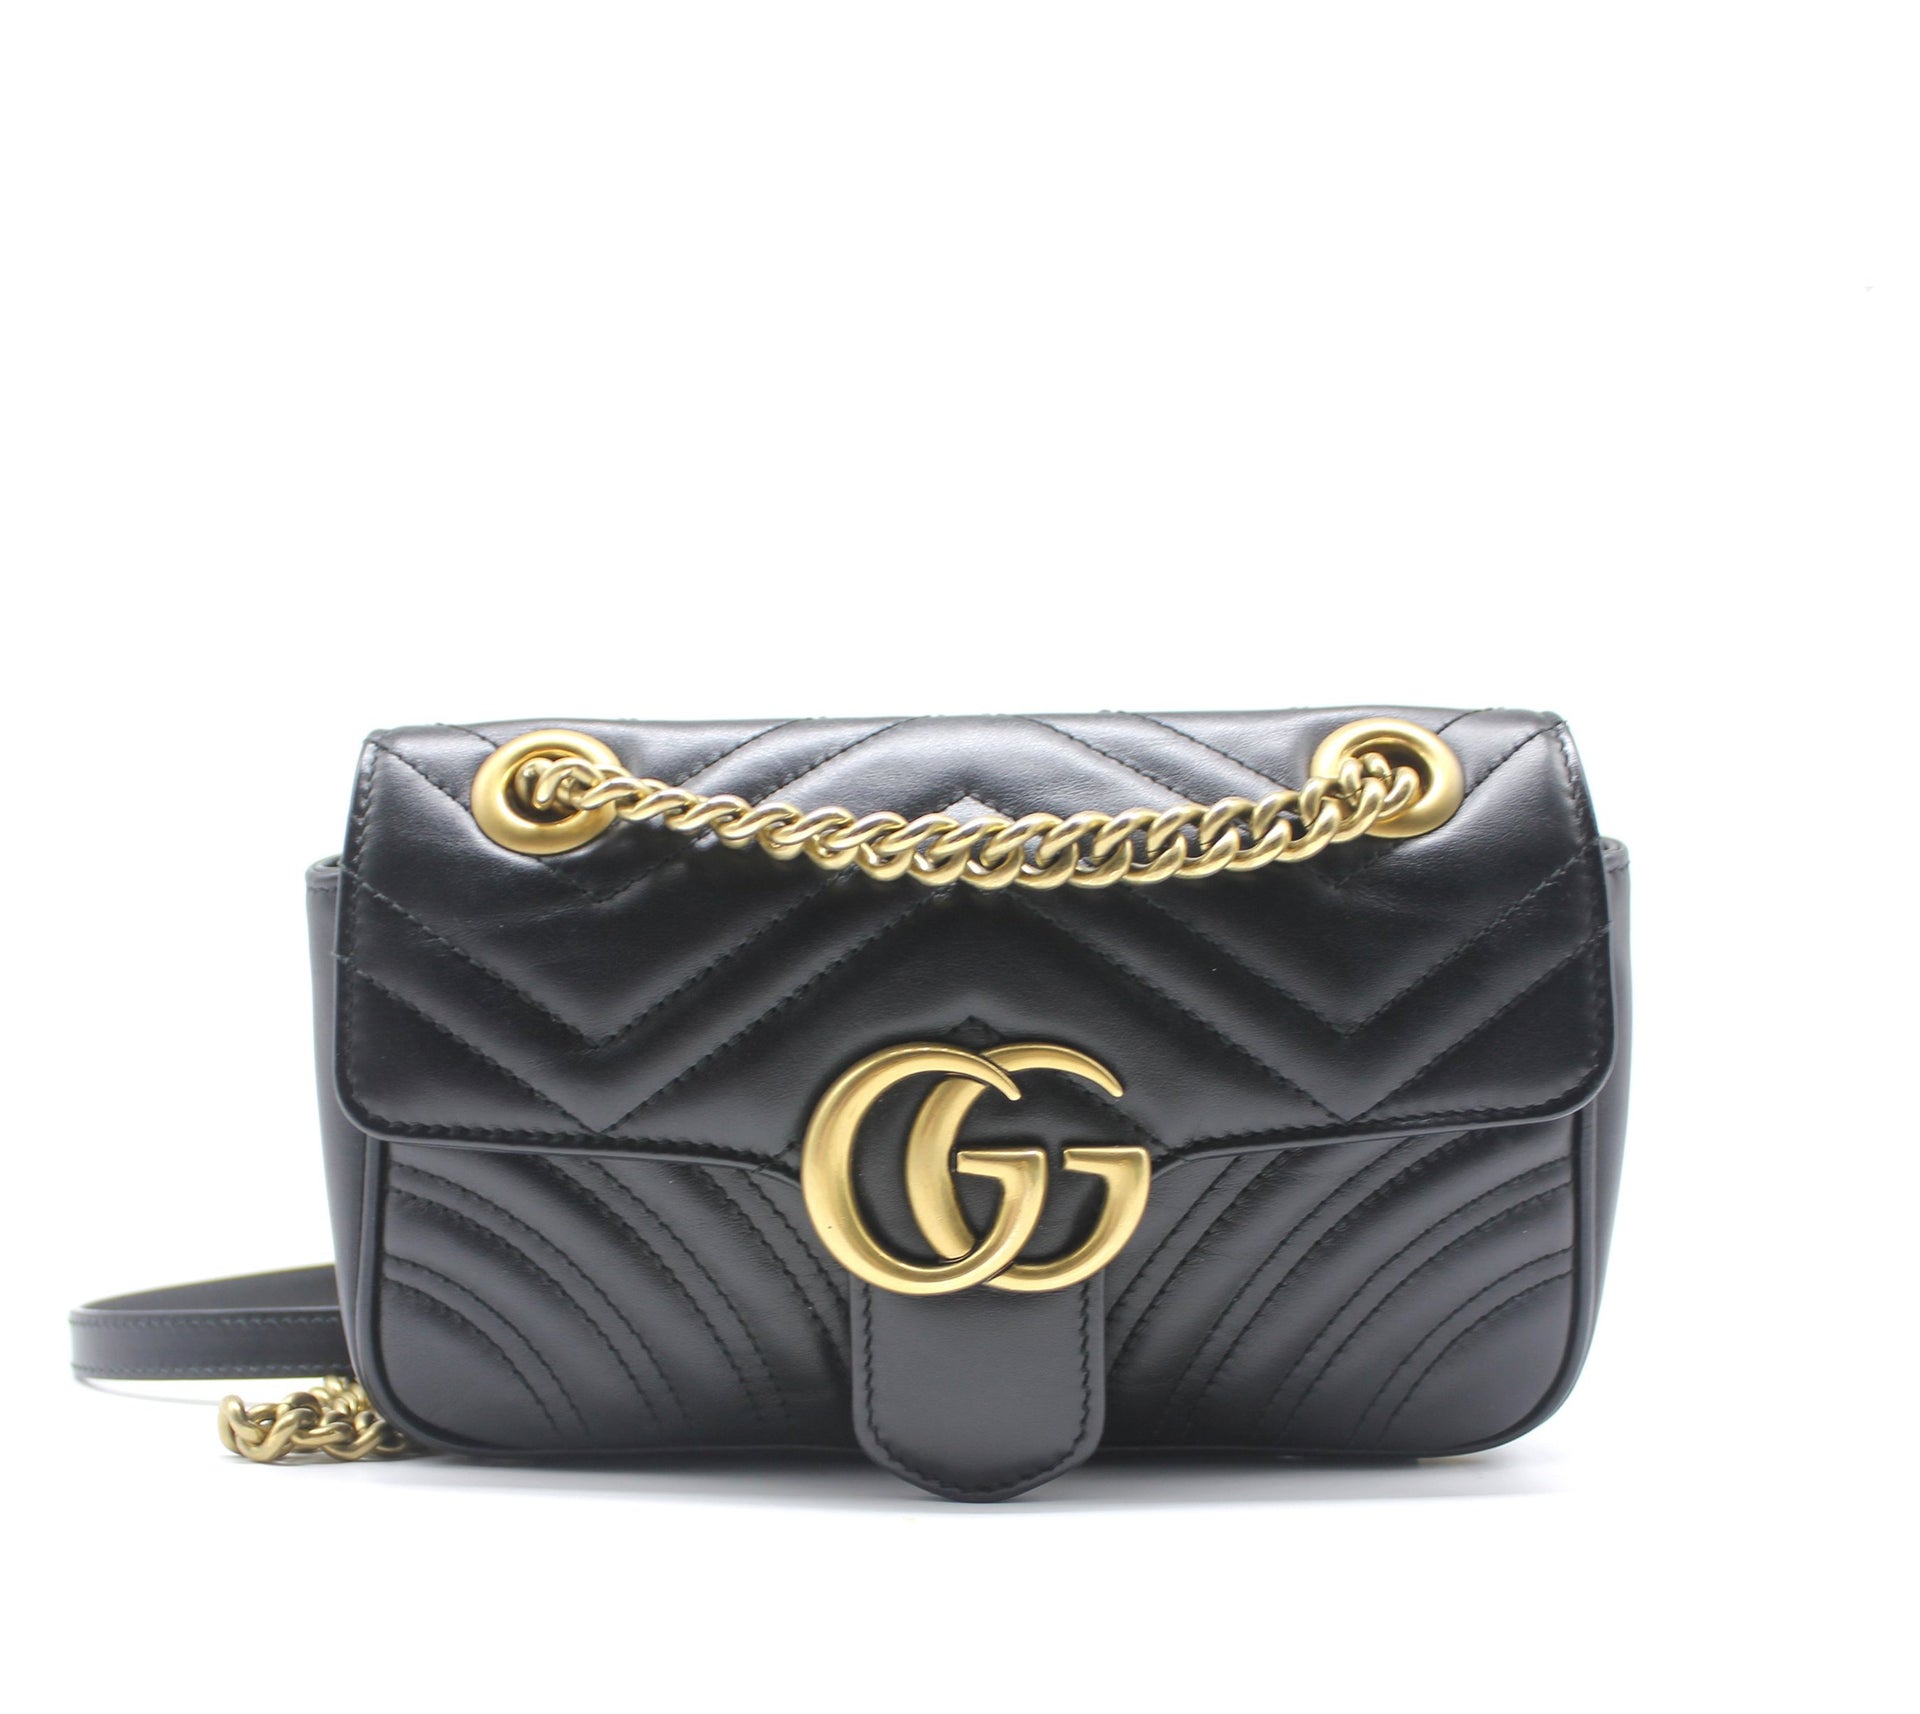 gucci gg marmont bag On Sale - Authenticated Resale